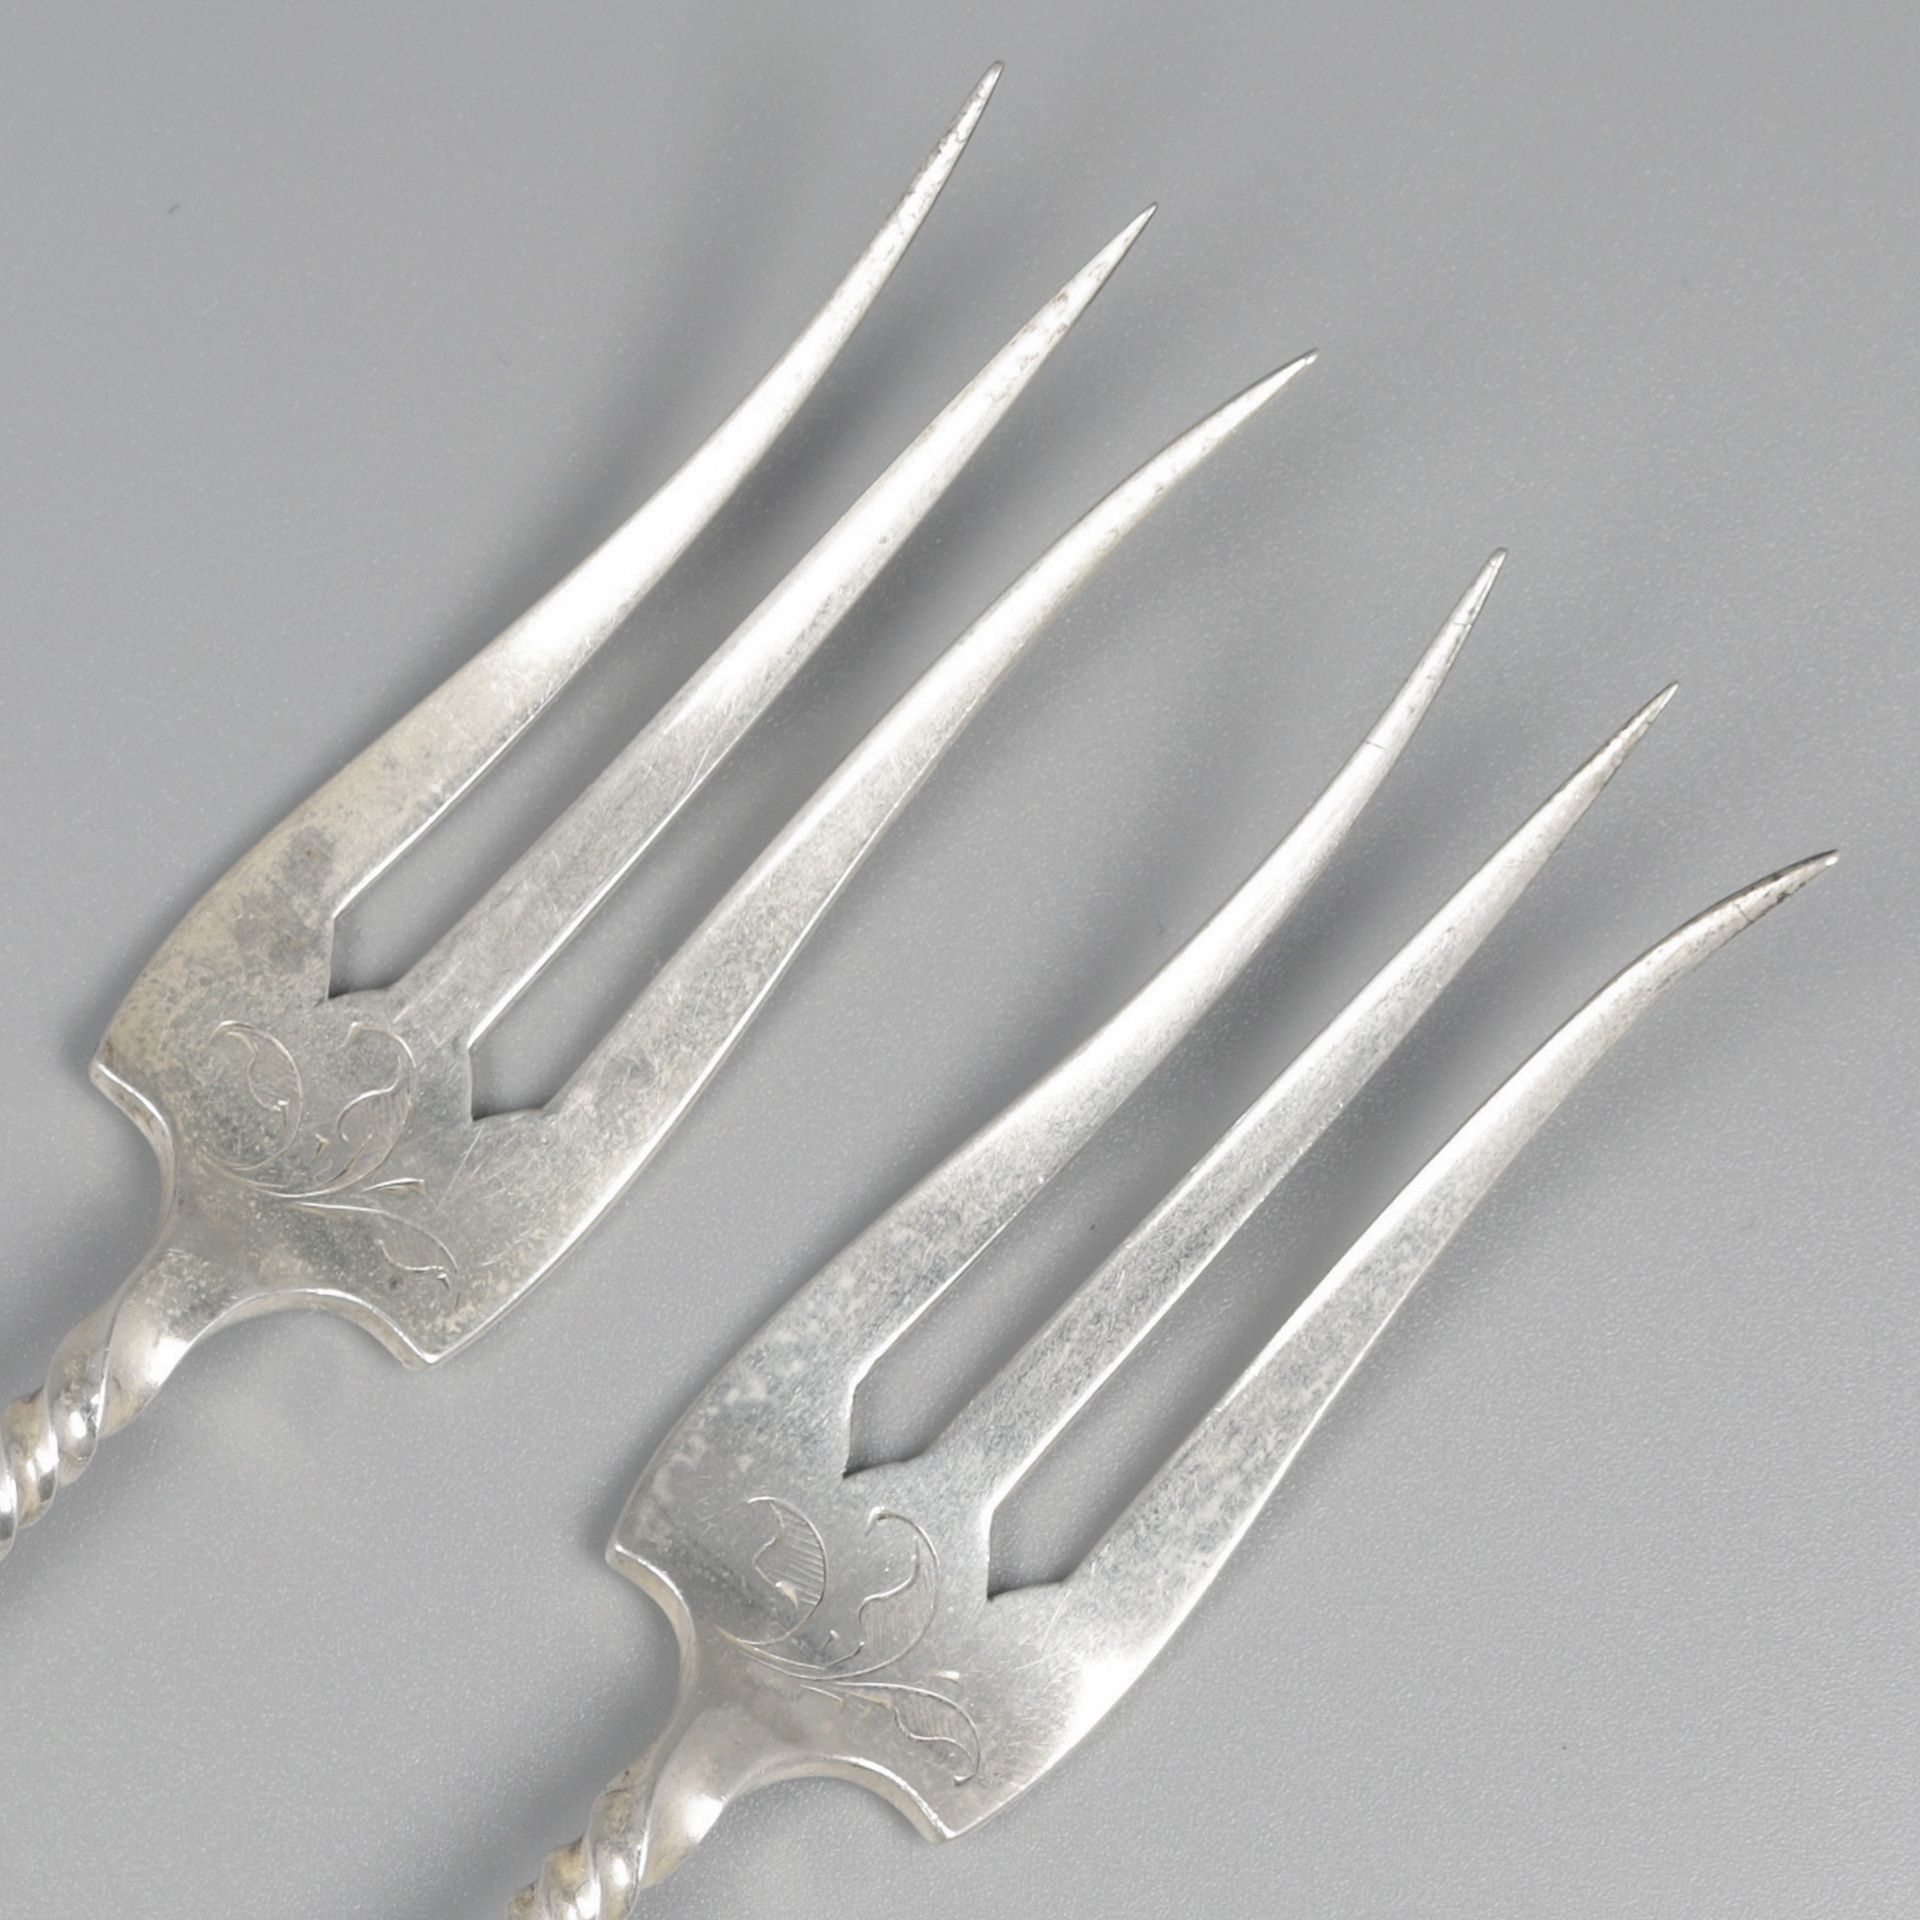 No reserve - 2-piece set of meat forks, silver. - Image 2 of 5